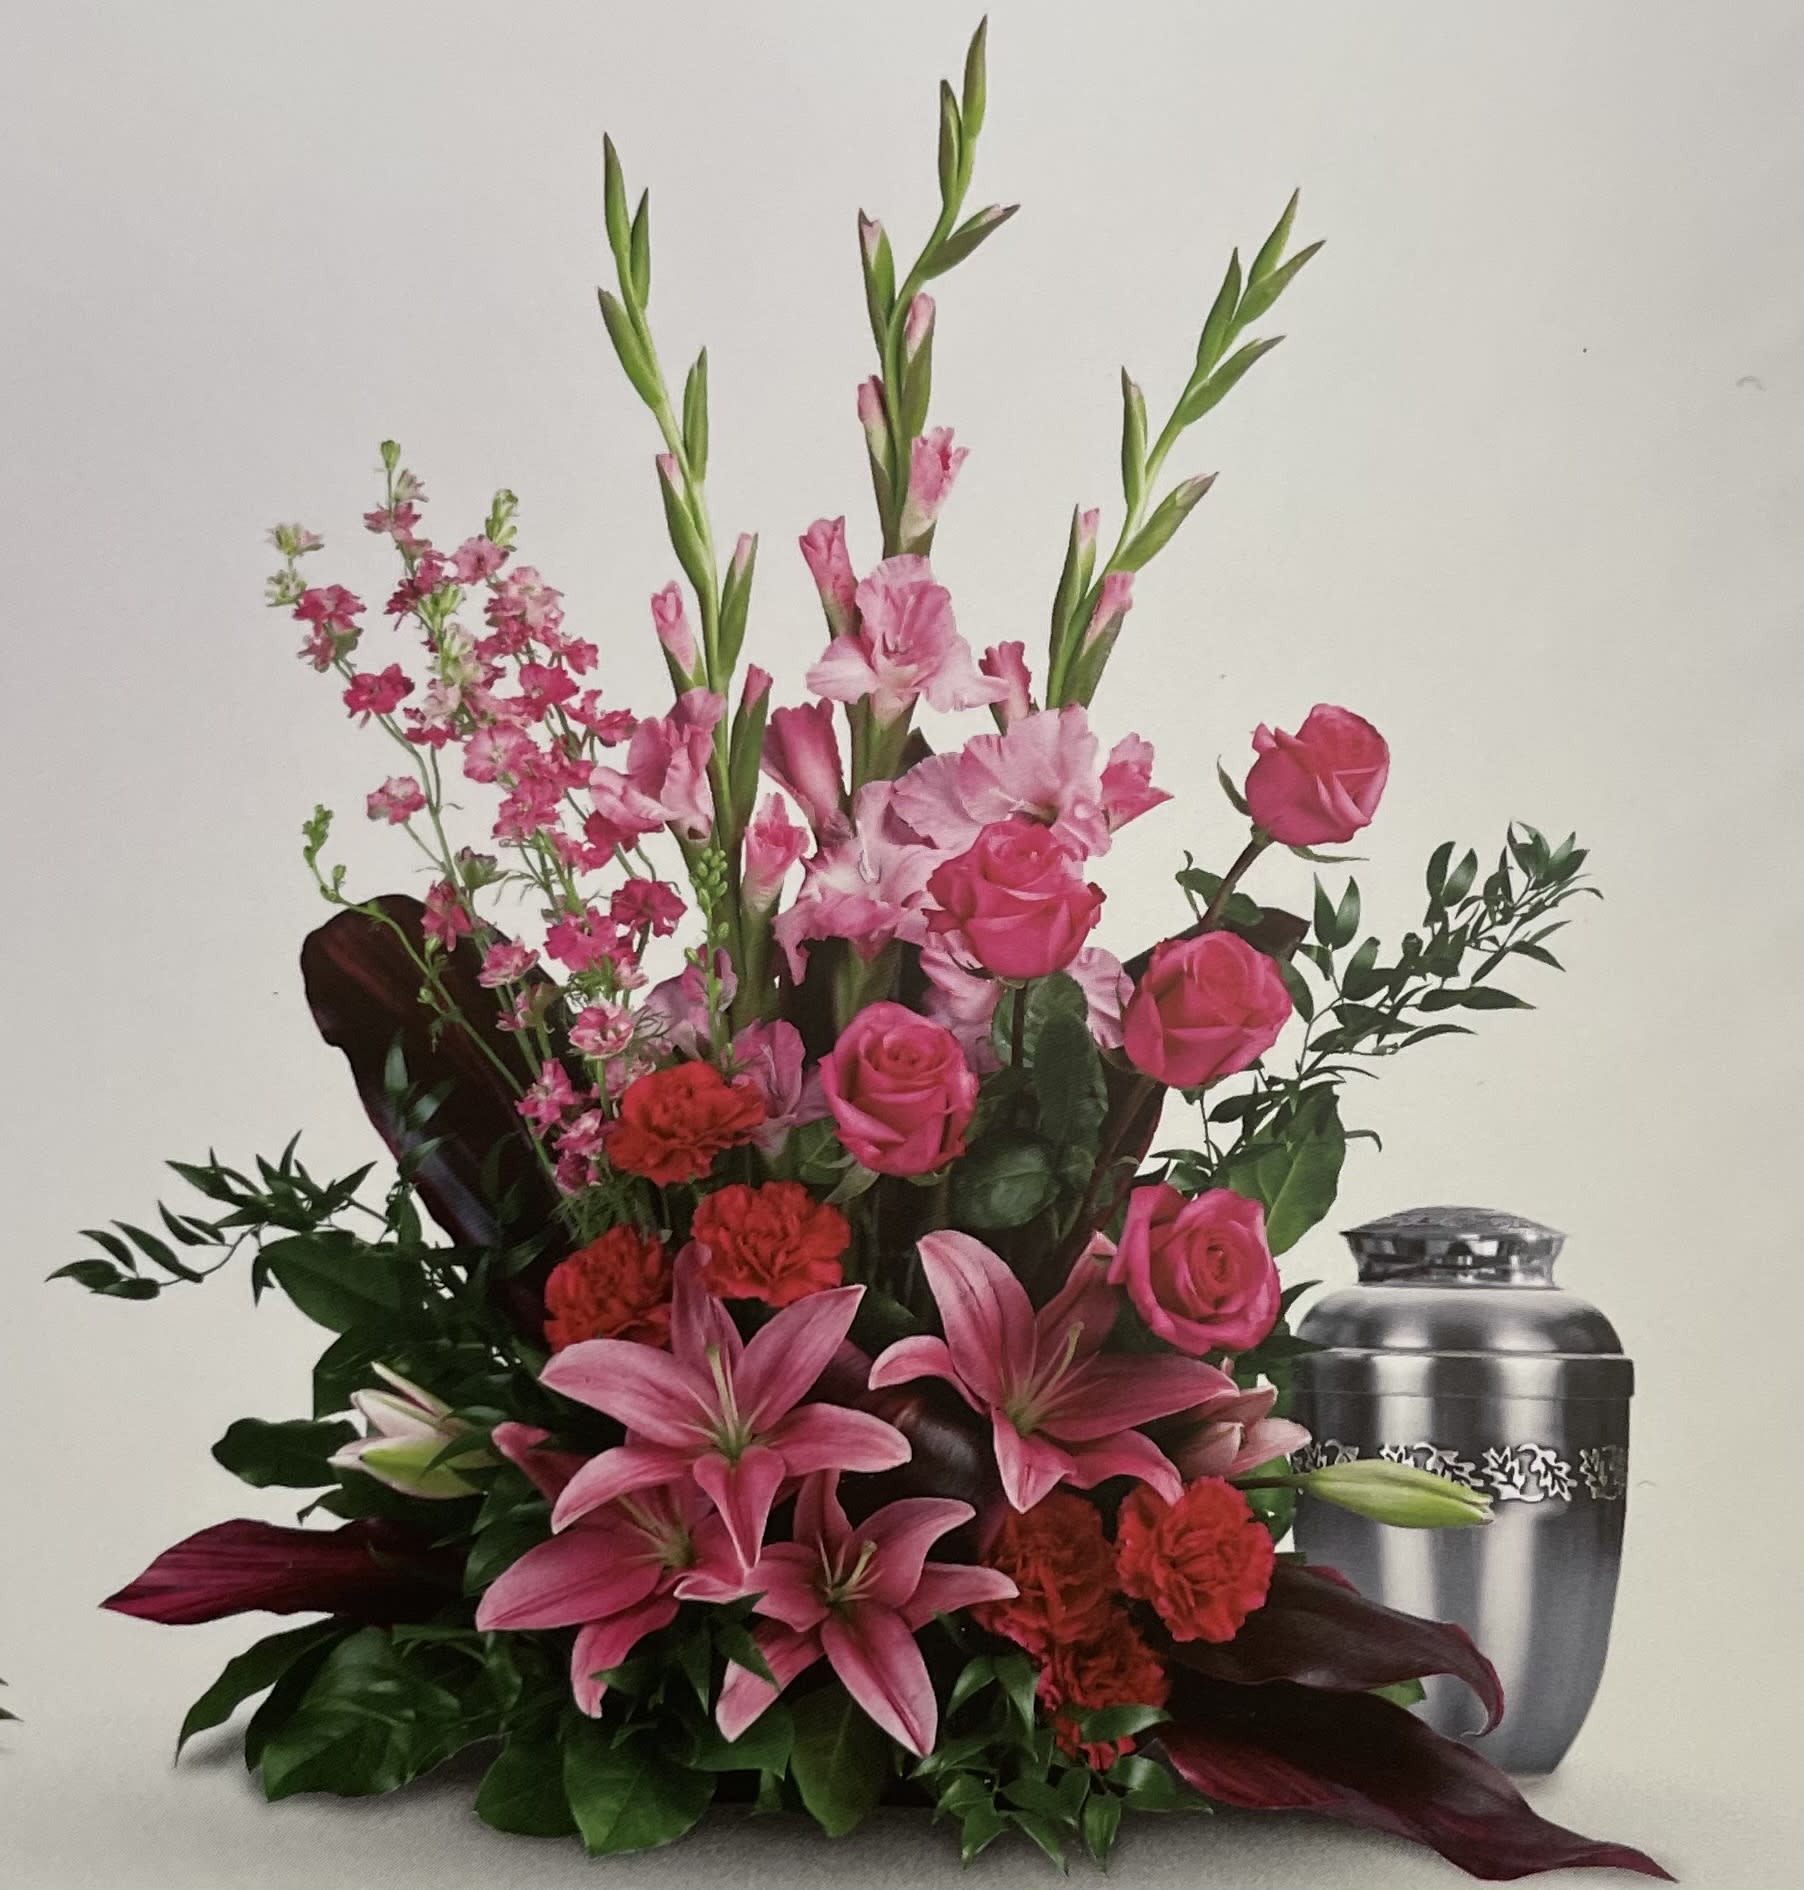 Adoring Heart Cremation Tribute  - Adoring Heart Cremation Tribute by Grand Floral Events